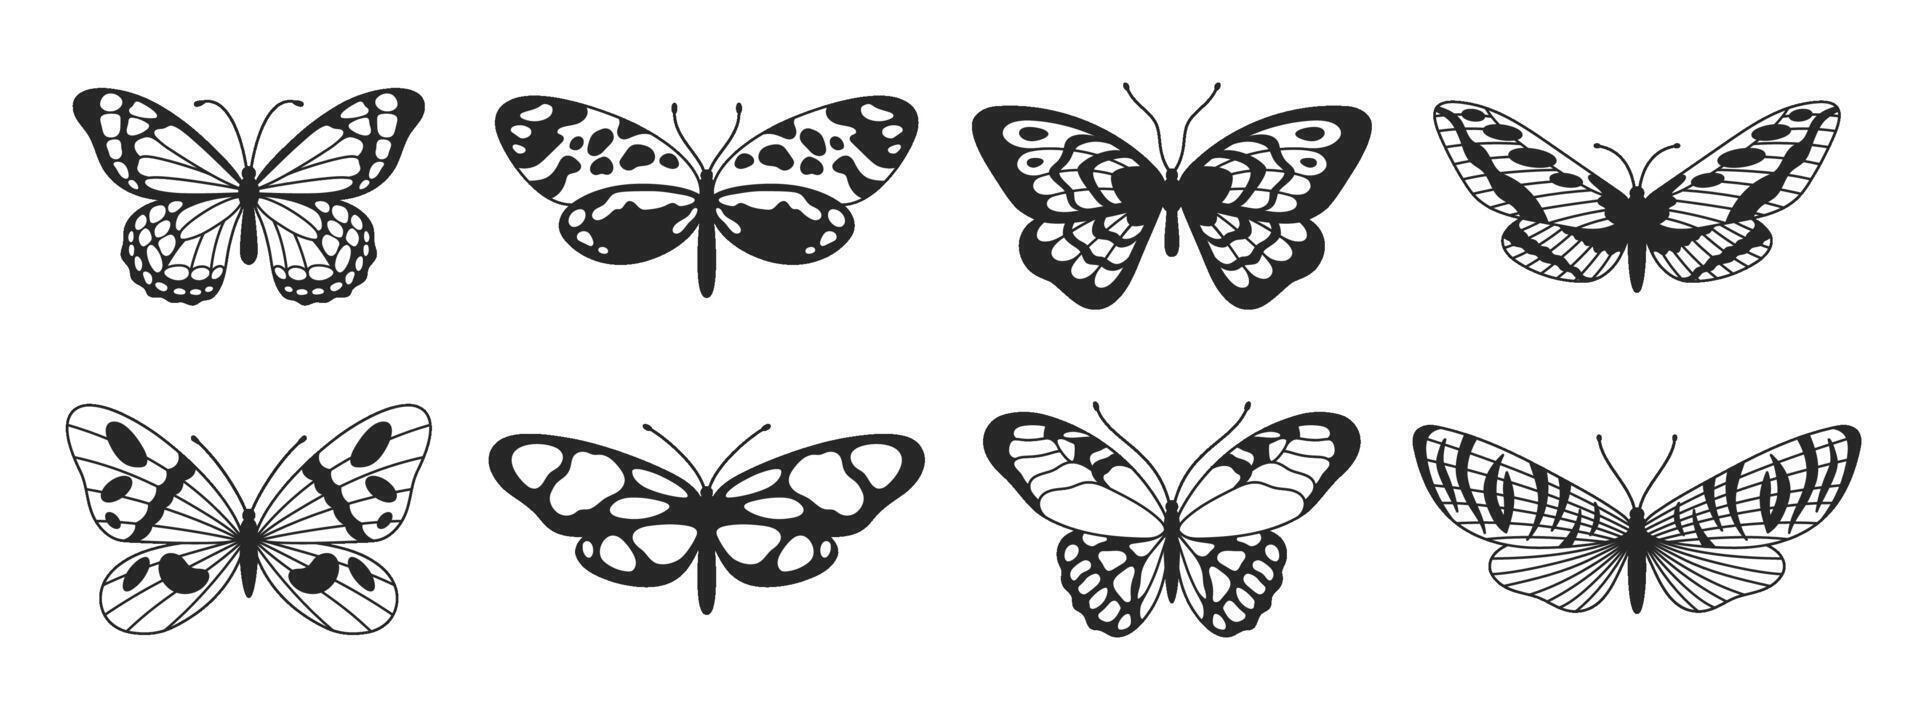 Butterfly fifth set of black and white wings in the style of wavy lines and organic shapes. Y2k aesthetic, tattoo silhouette, hand drawn stickers. Vector graphic in trendy retro 2000s style